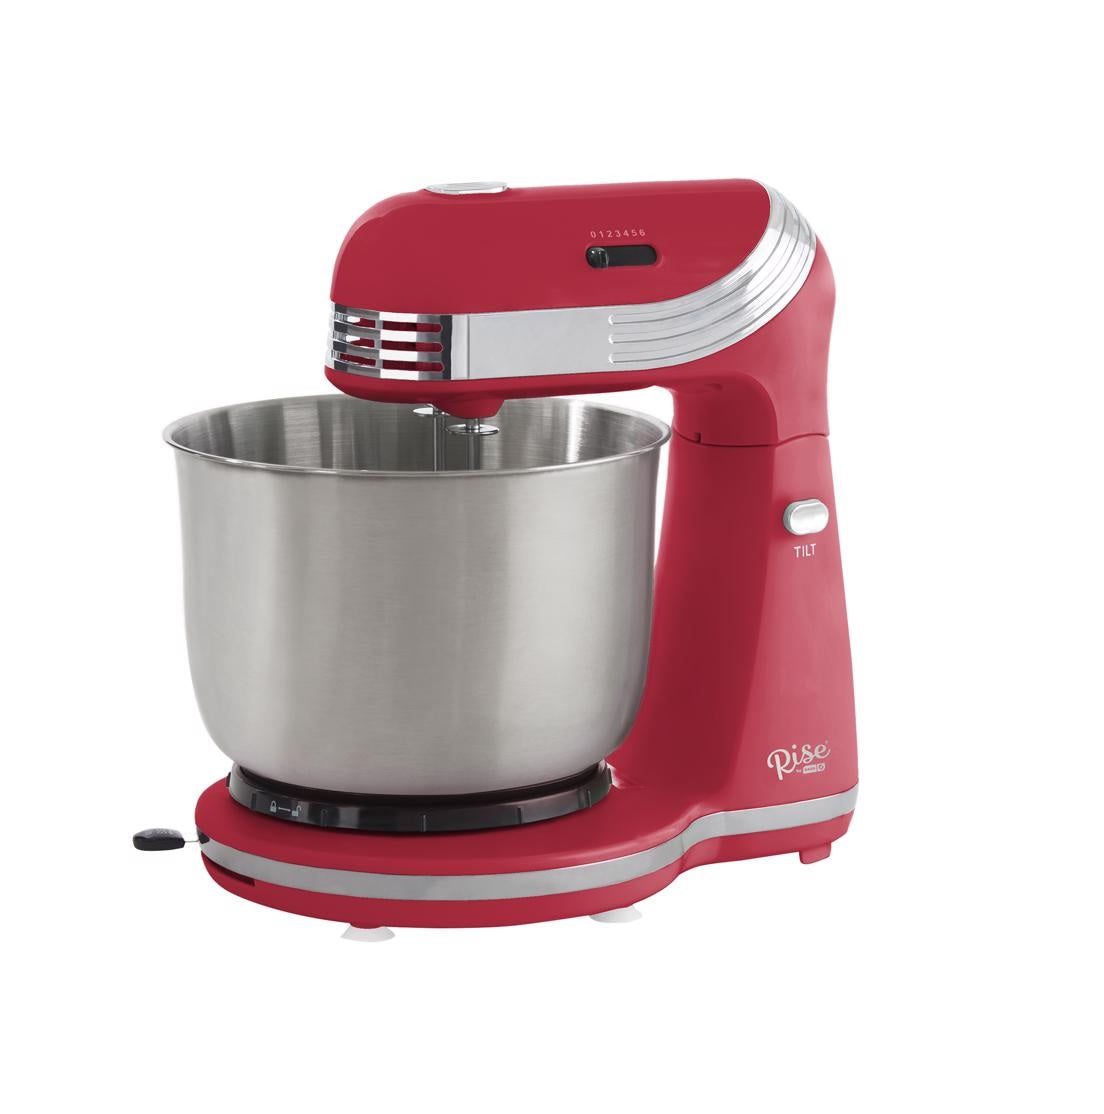 Rise by Dash RCSM200GBRR02 Stand Mixer, Red, 3 qt. cap.